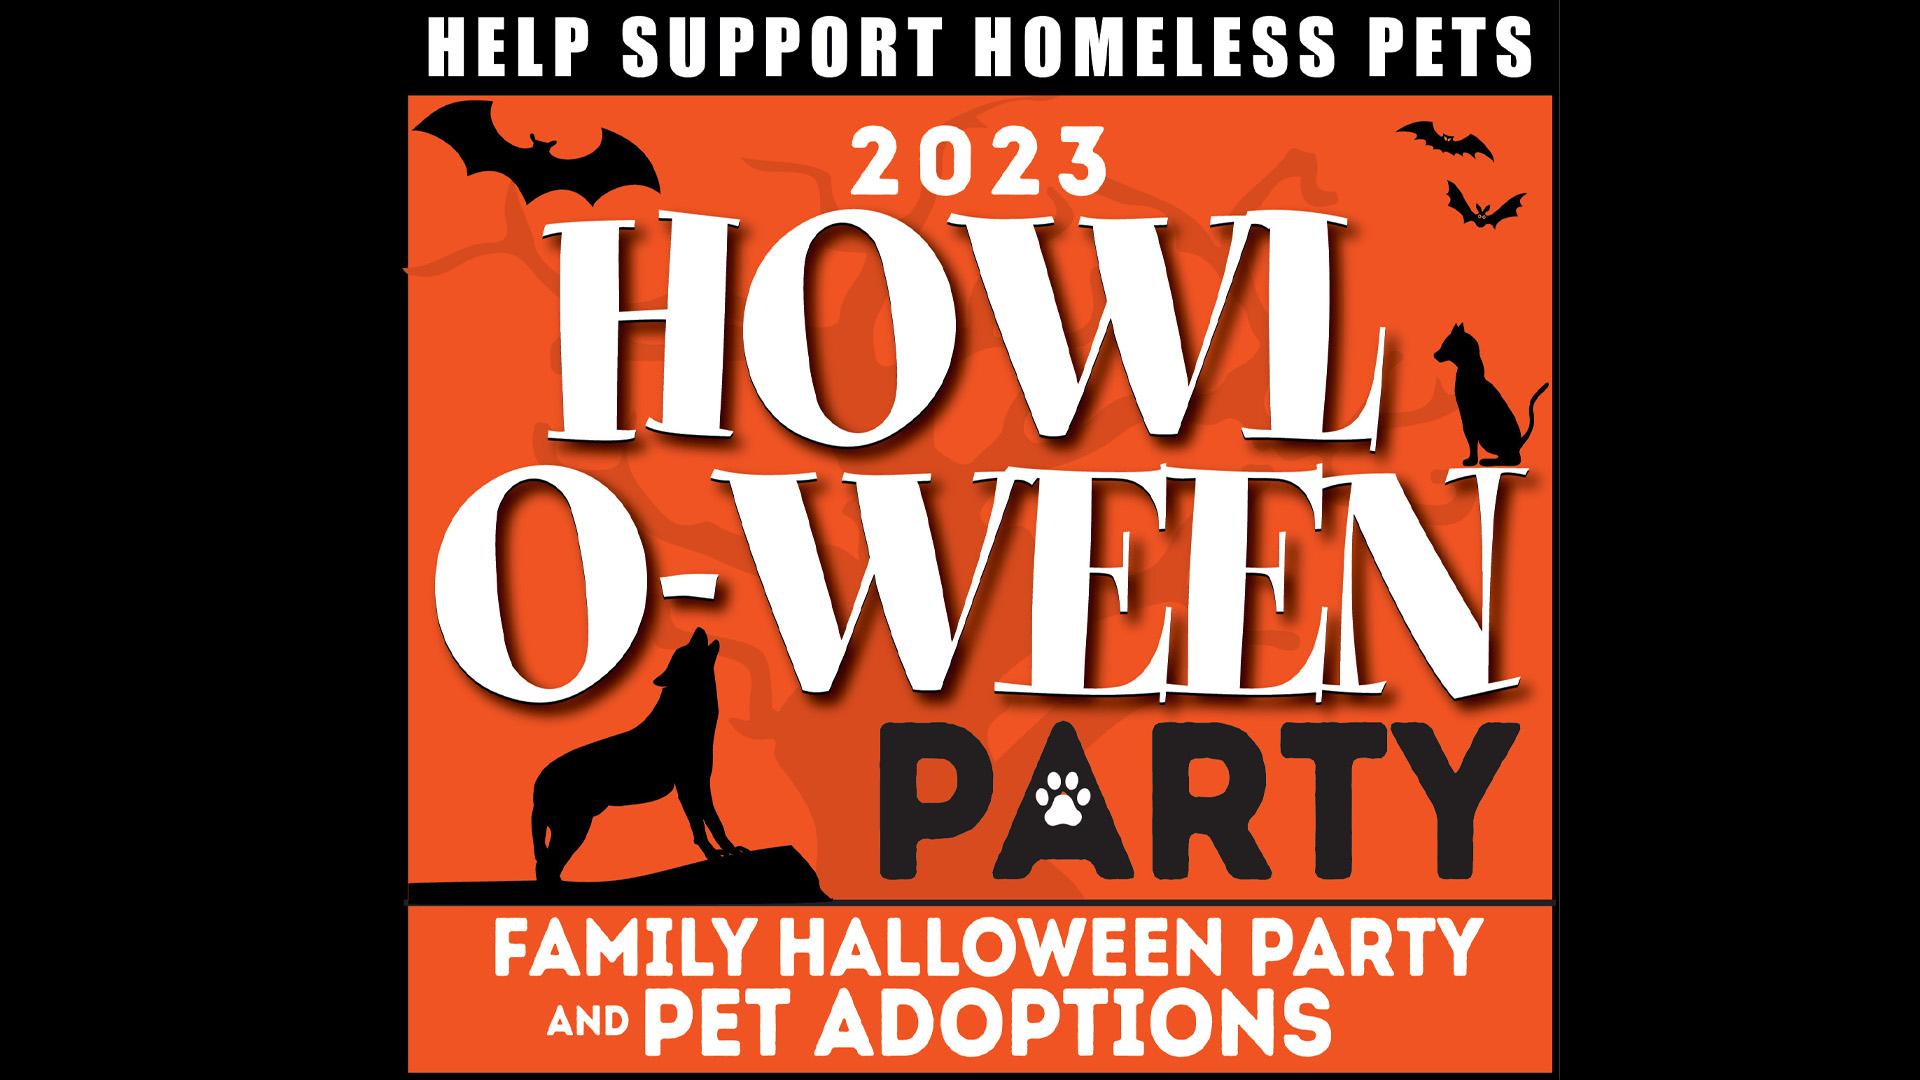 HOWL-O-Ween Party